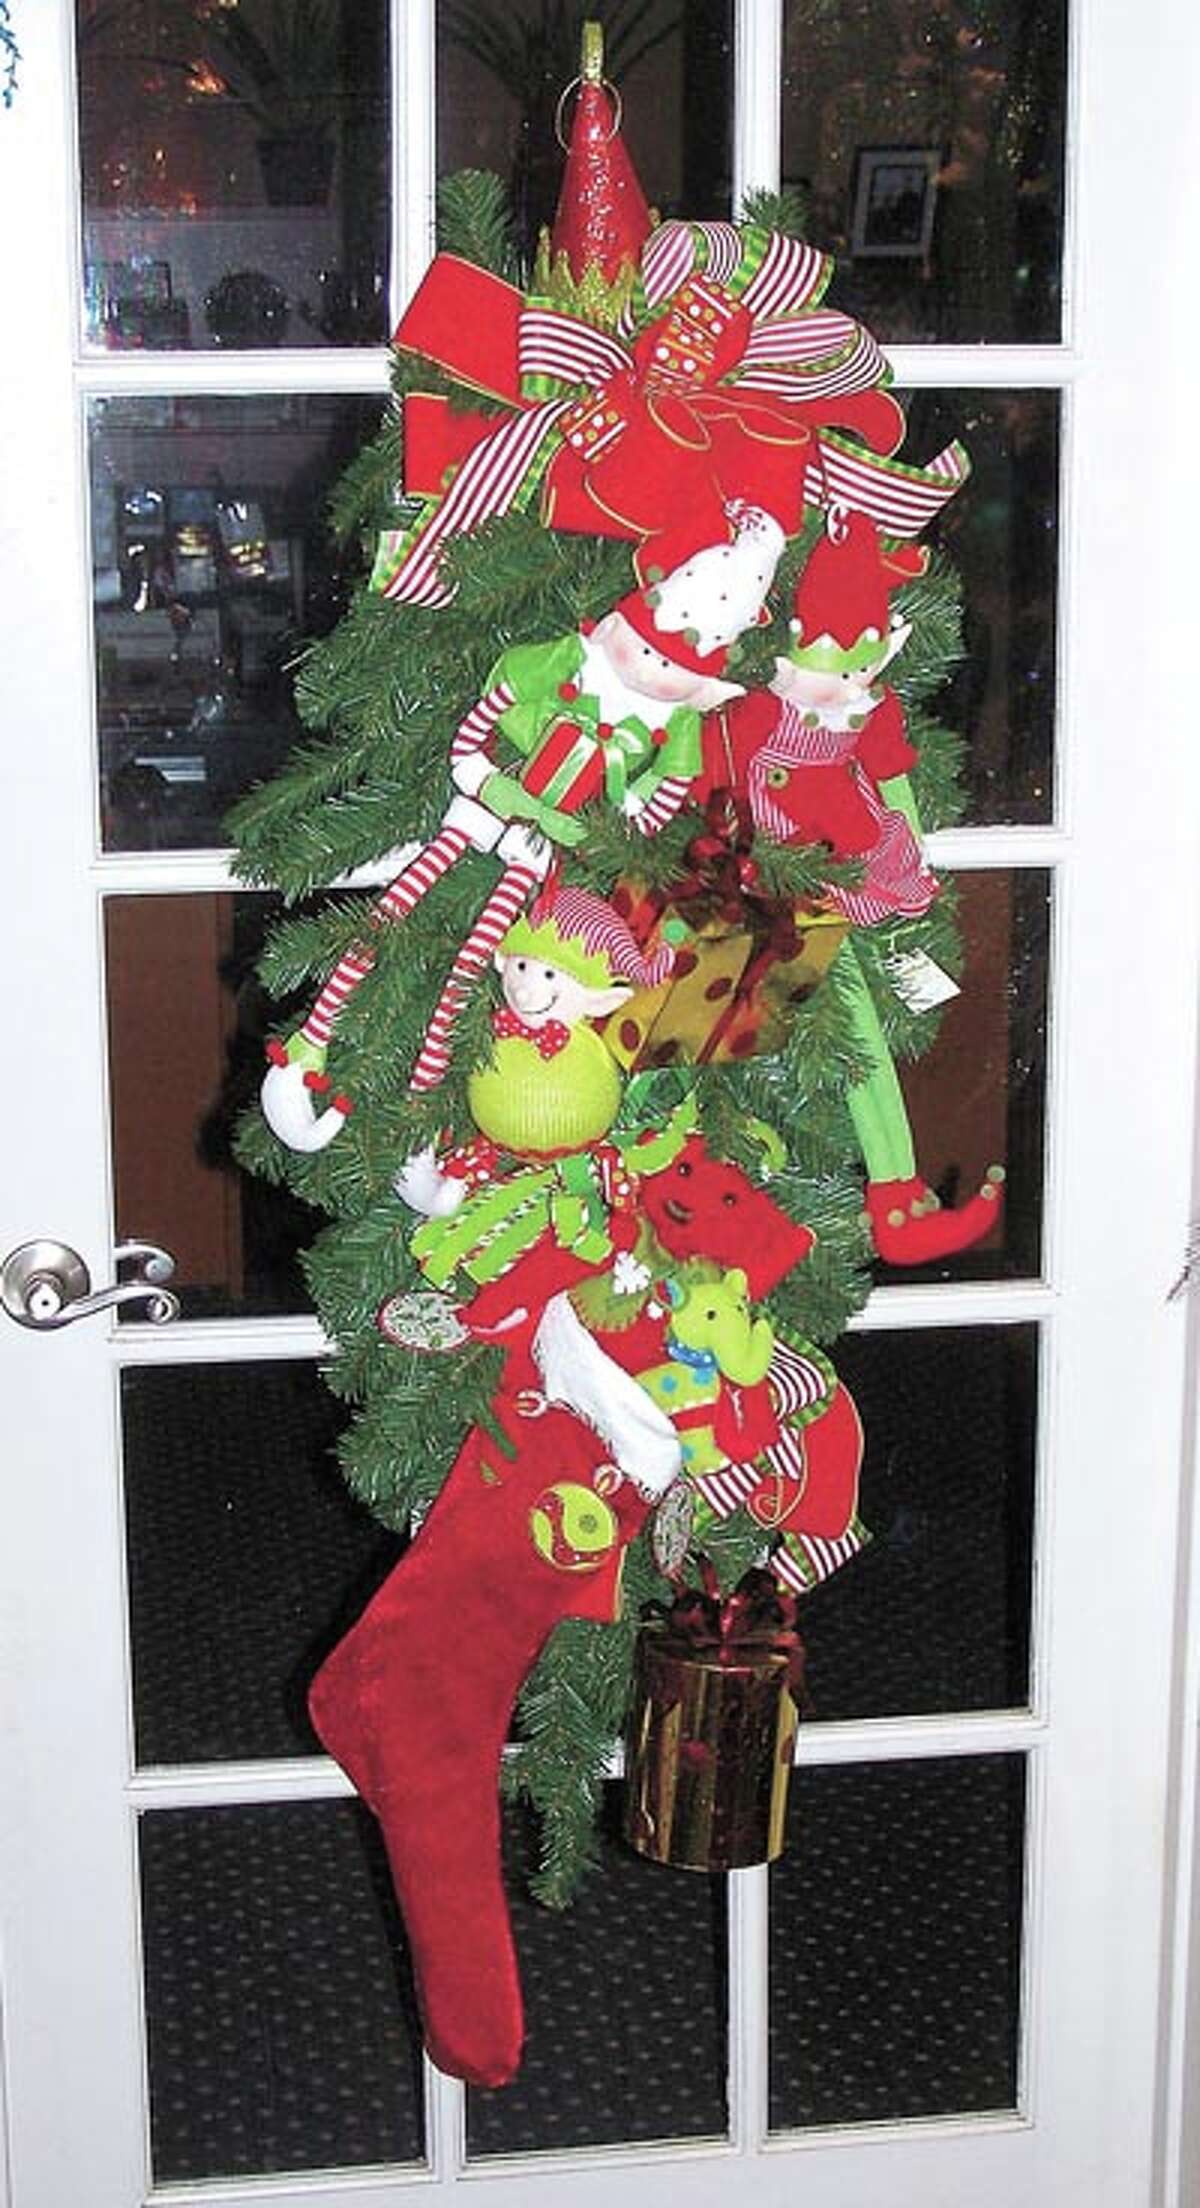 Want a quick start to your holiday decorating? Go by Flowerland and see their selection of premade wreaths. If you have your own ideas, ask them to make one specially for you. Flowerland is at 413 Andrews Highway.